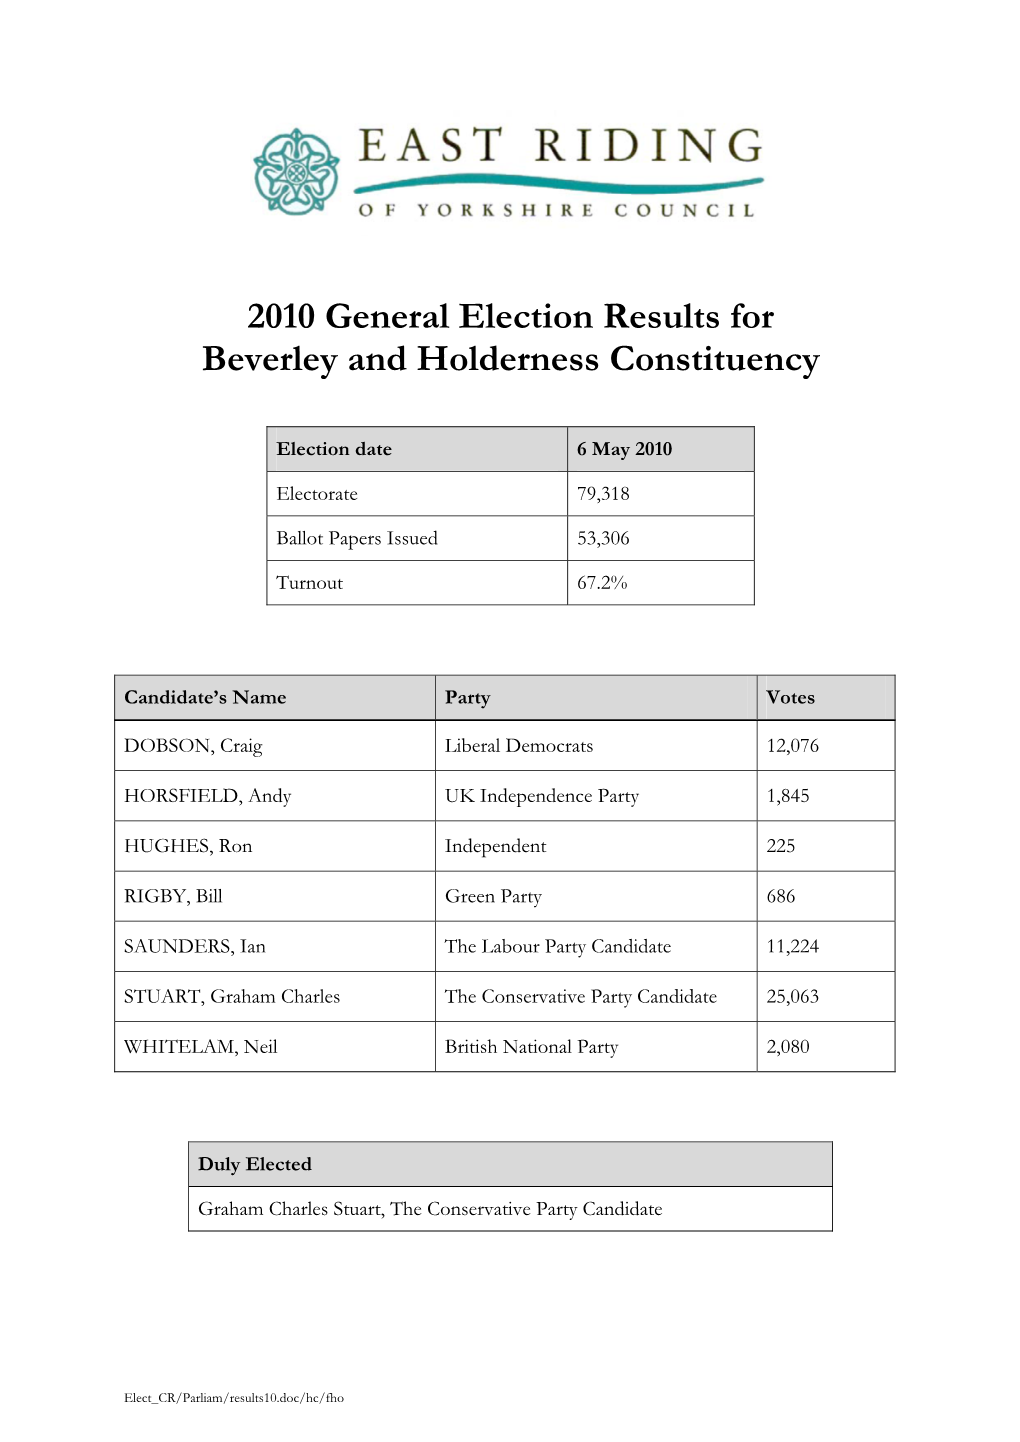 2010 General Election Results for Beverley and Holderness Constituency